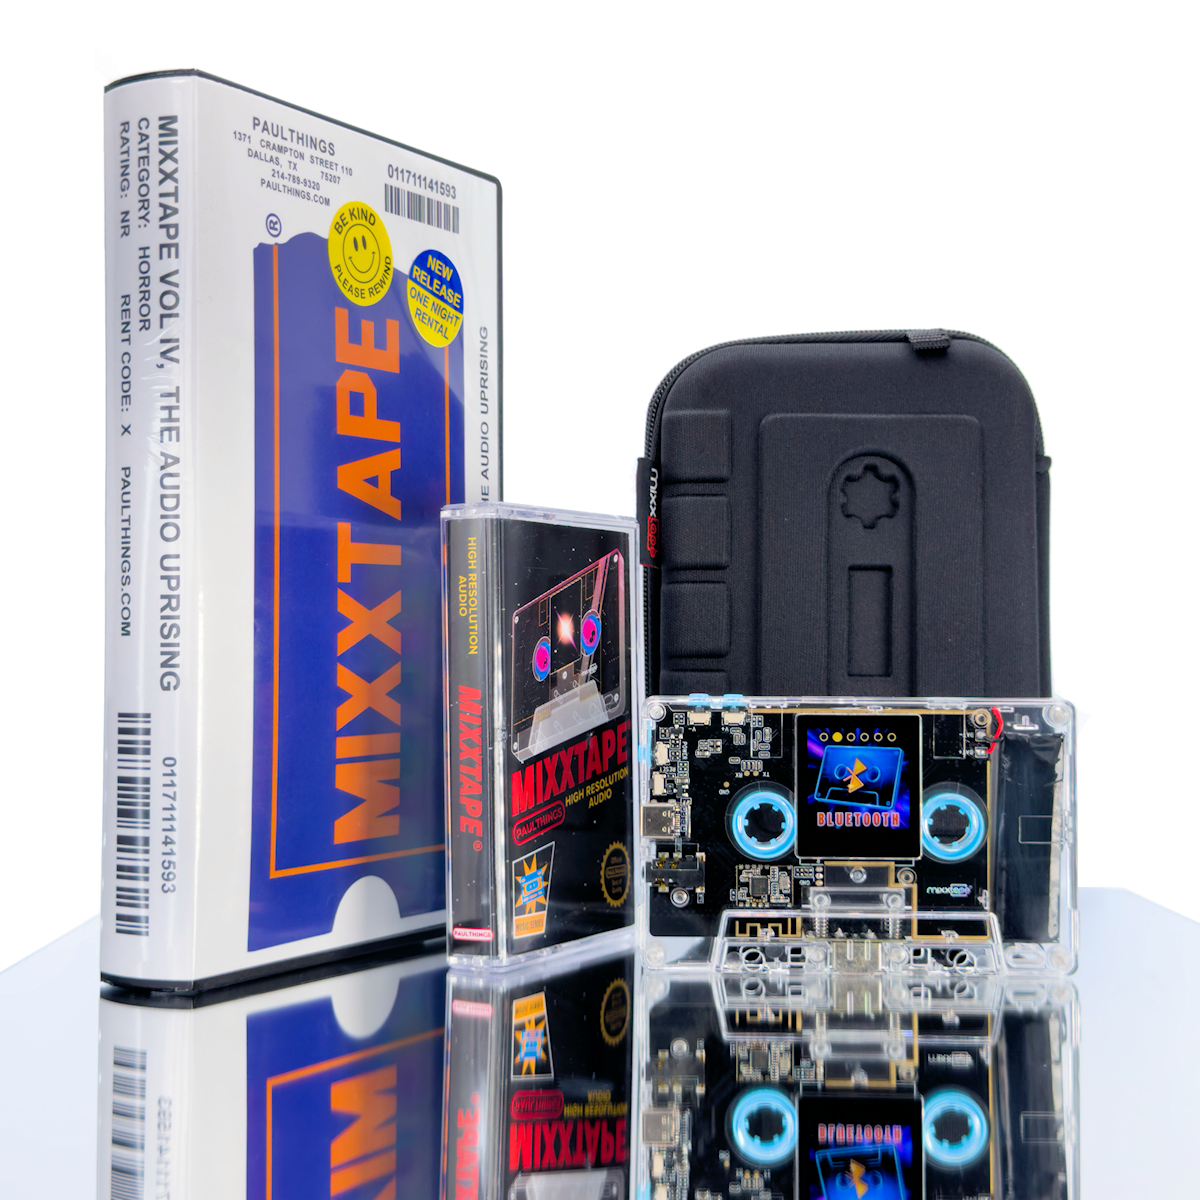 Mixxtape: High-Resolution Audio Player in Classic Cassette Design - Ideal for Audiophiles and Retro Music Enthusiasts